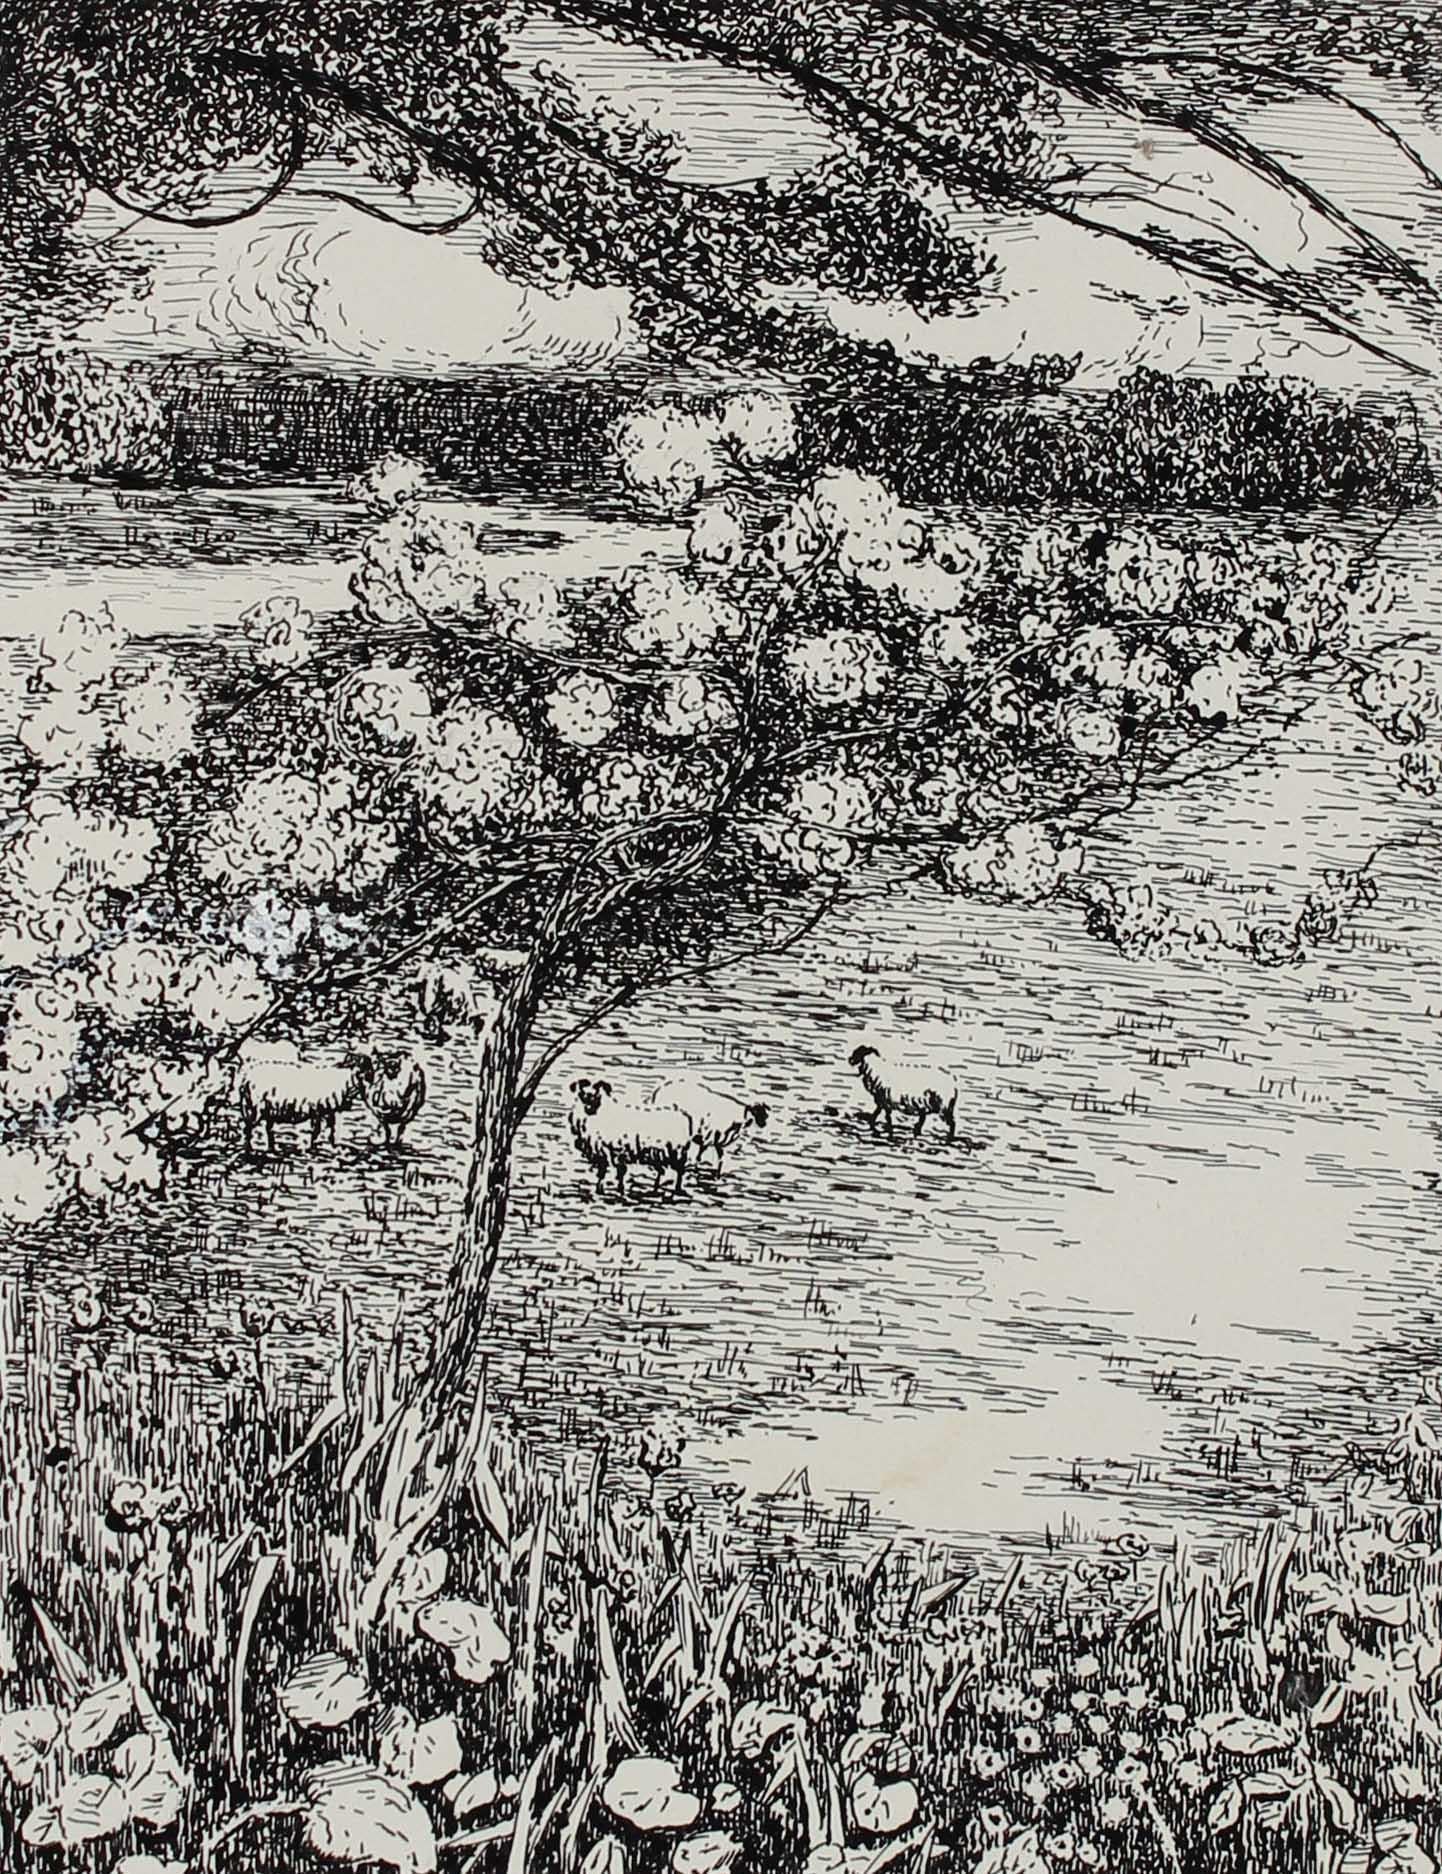 Duncan Davidson Landscape Painting - Monochromatic Impressionist Landscape with Sheep and Trees in Ink, 1932